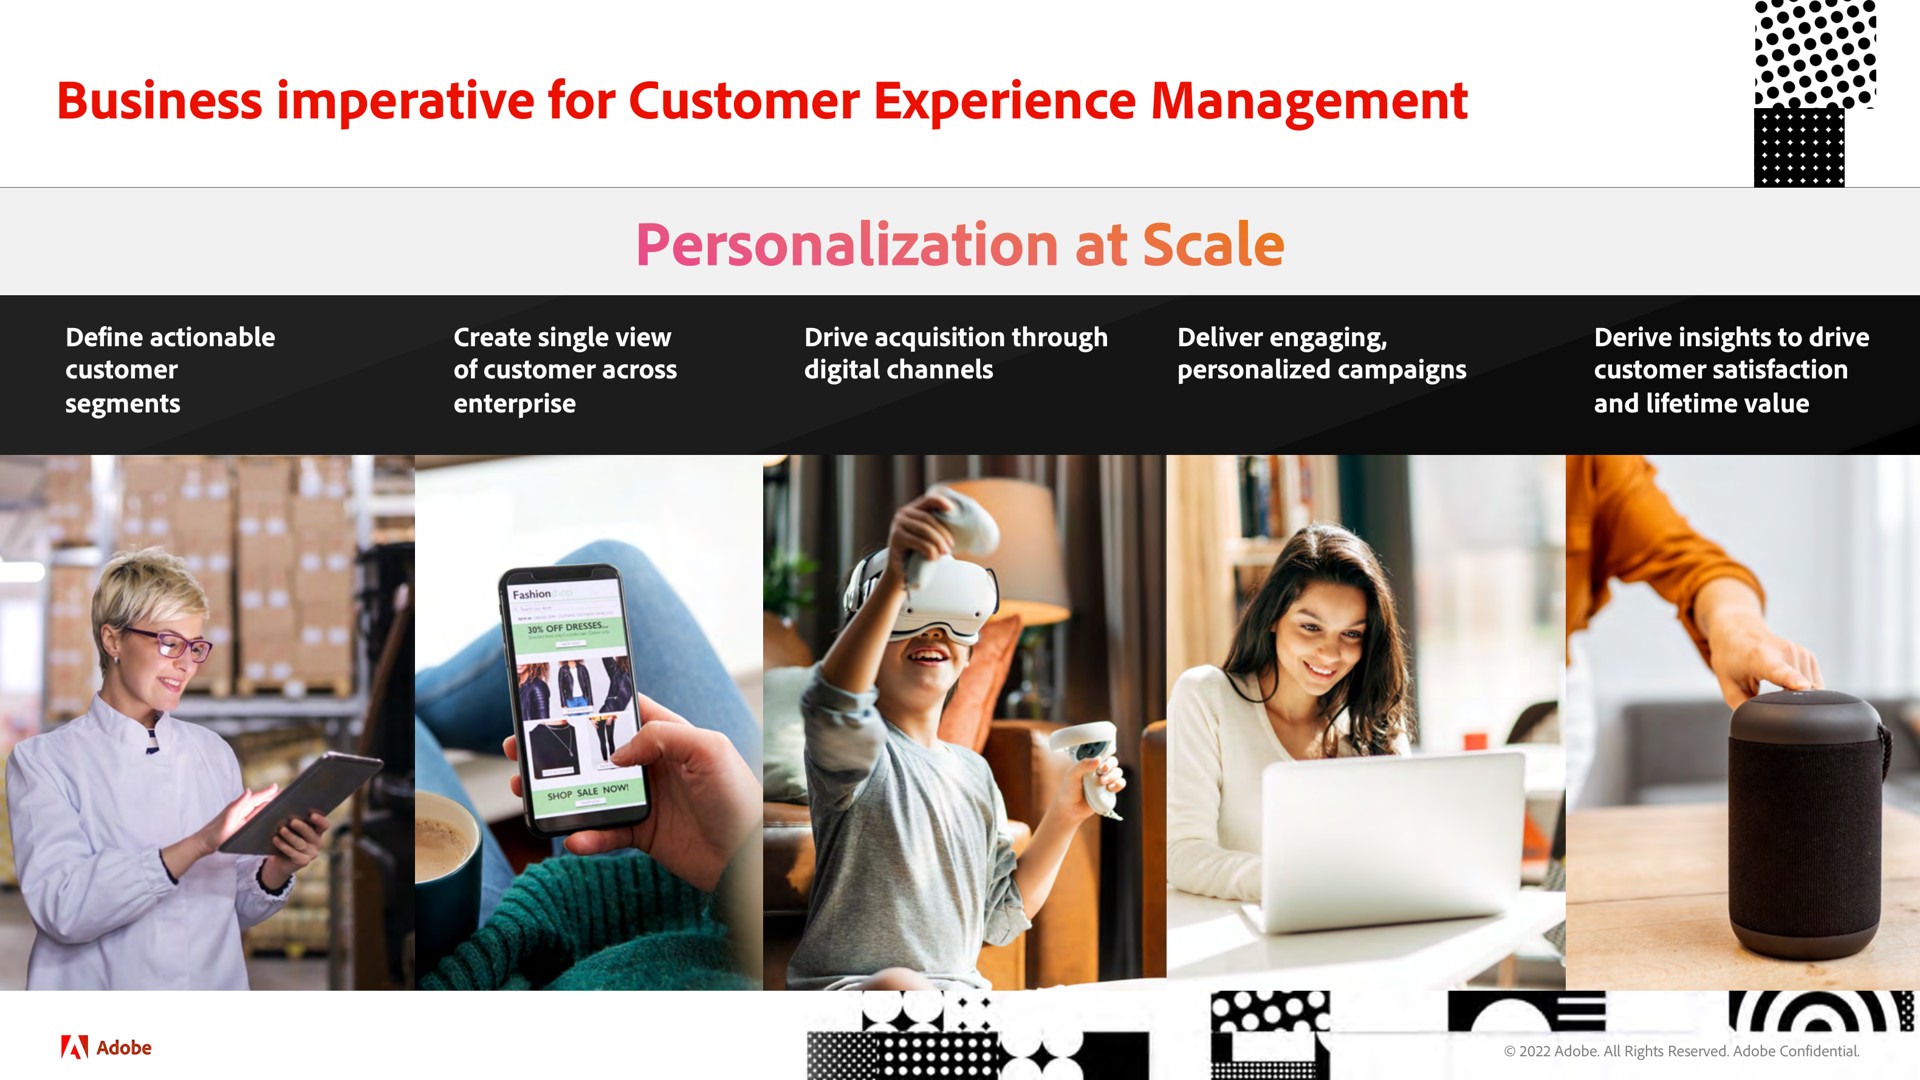 business imperative for customer experience management | Adobe